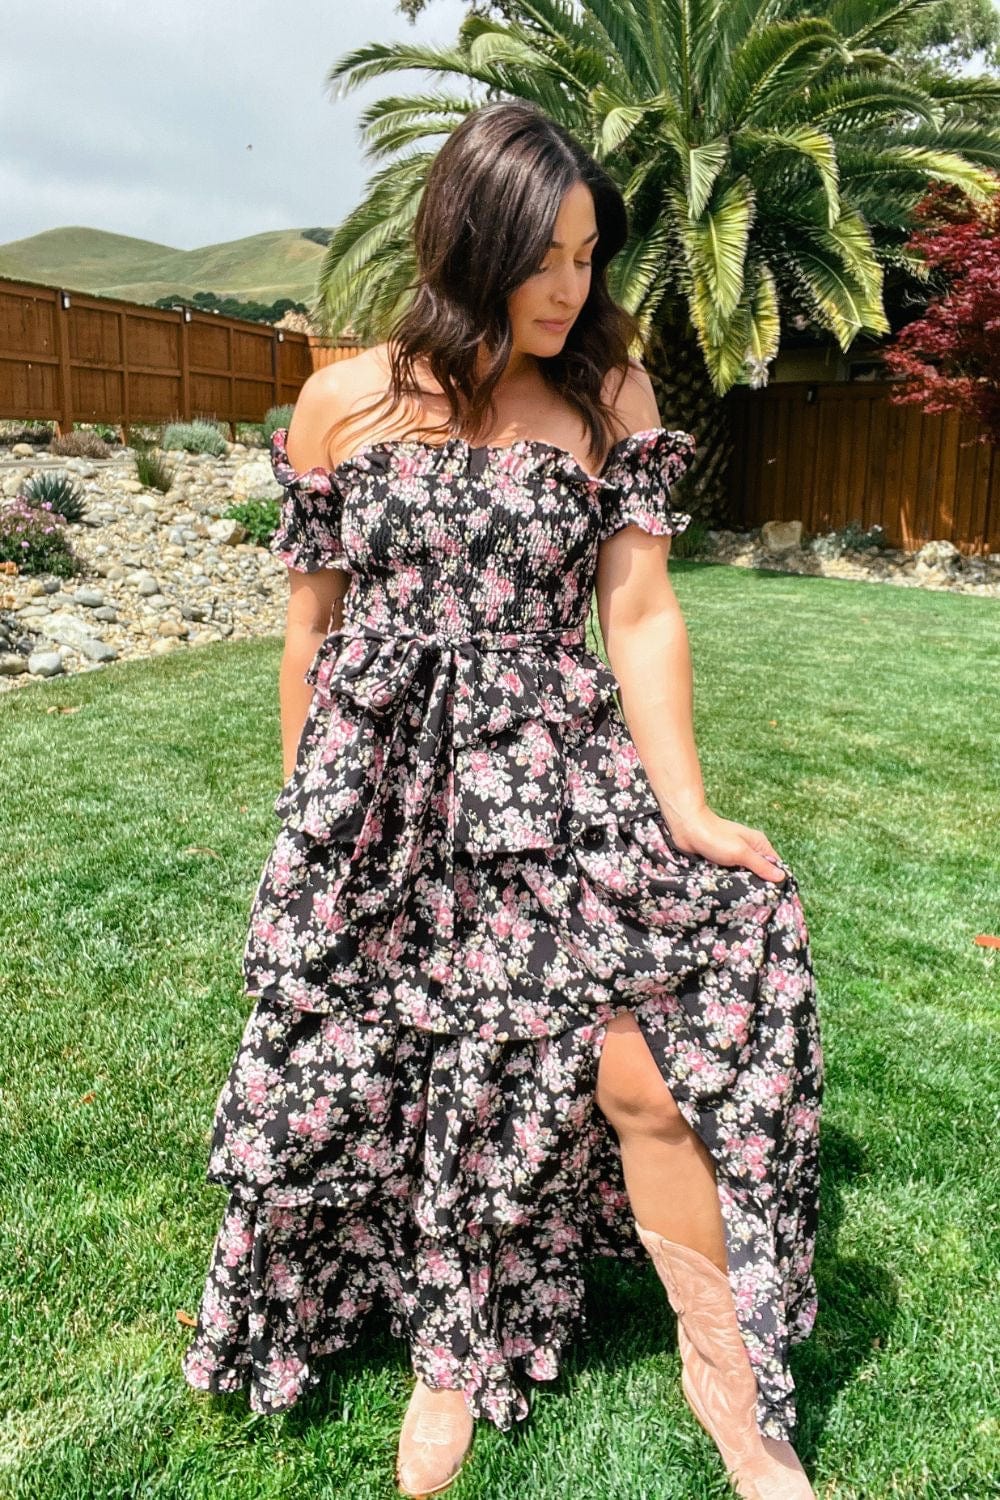 Elegant Romance Unveiled | Black Floral Print Maxi Dress with Tiered Ruffles - Women's Dresses - Blooming Daily